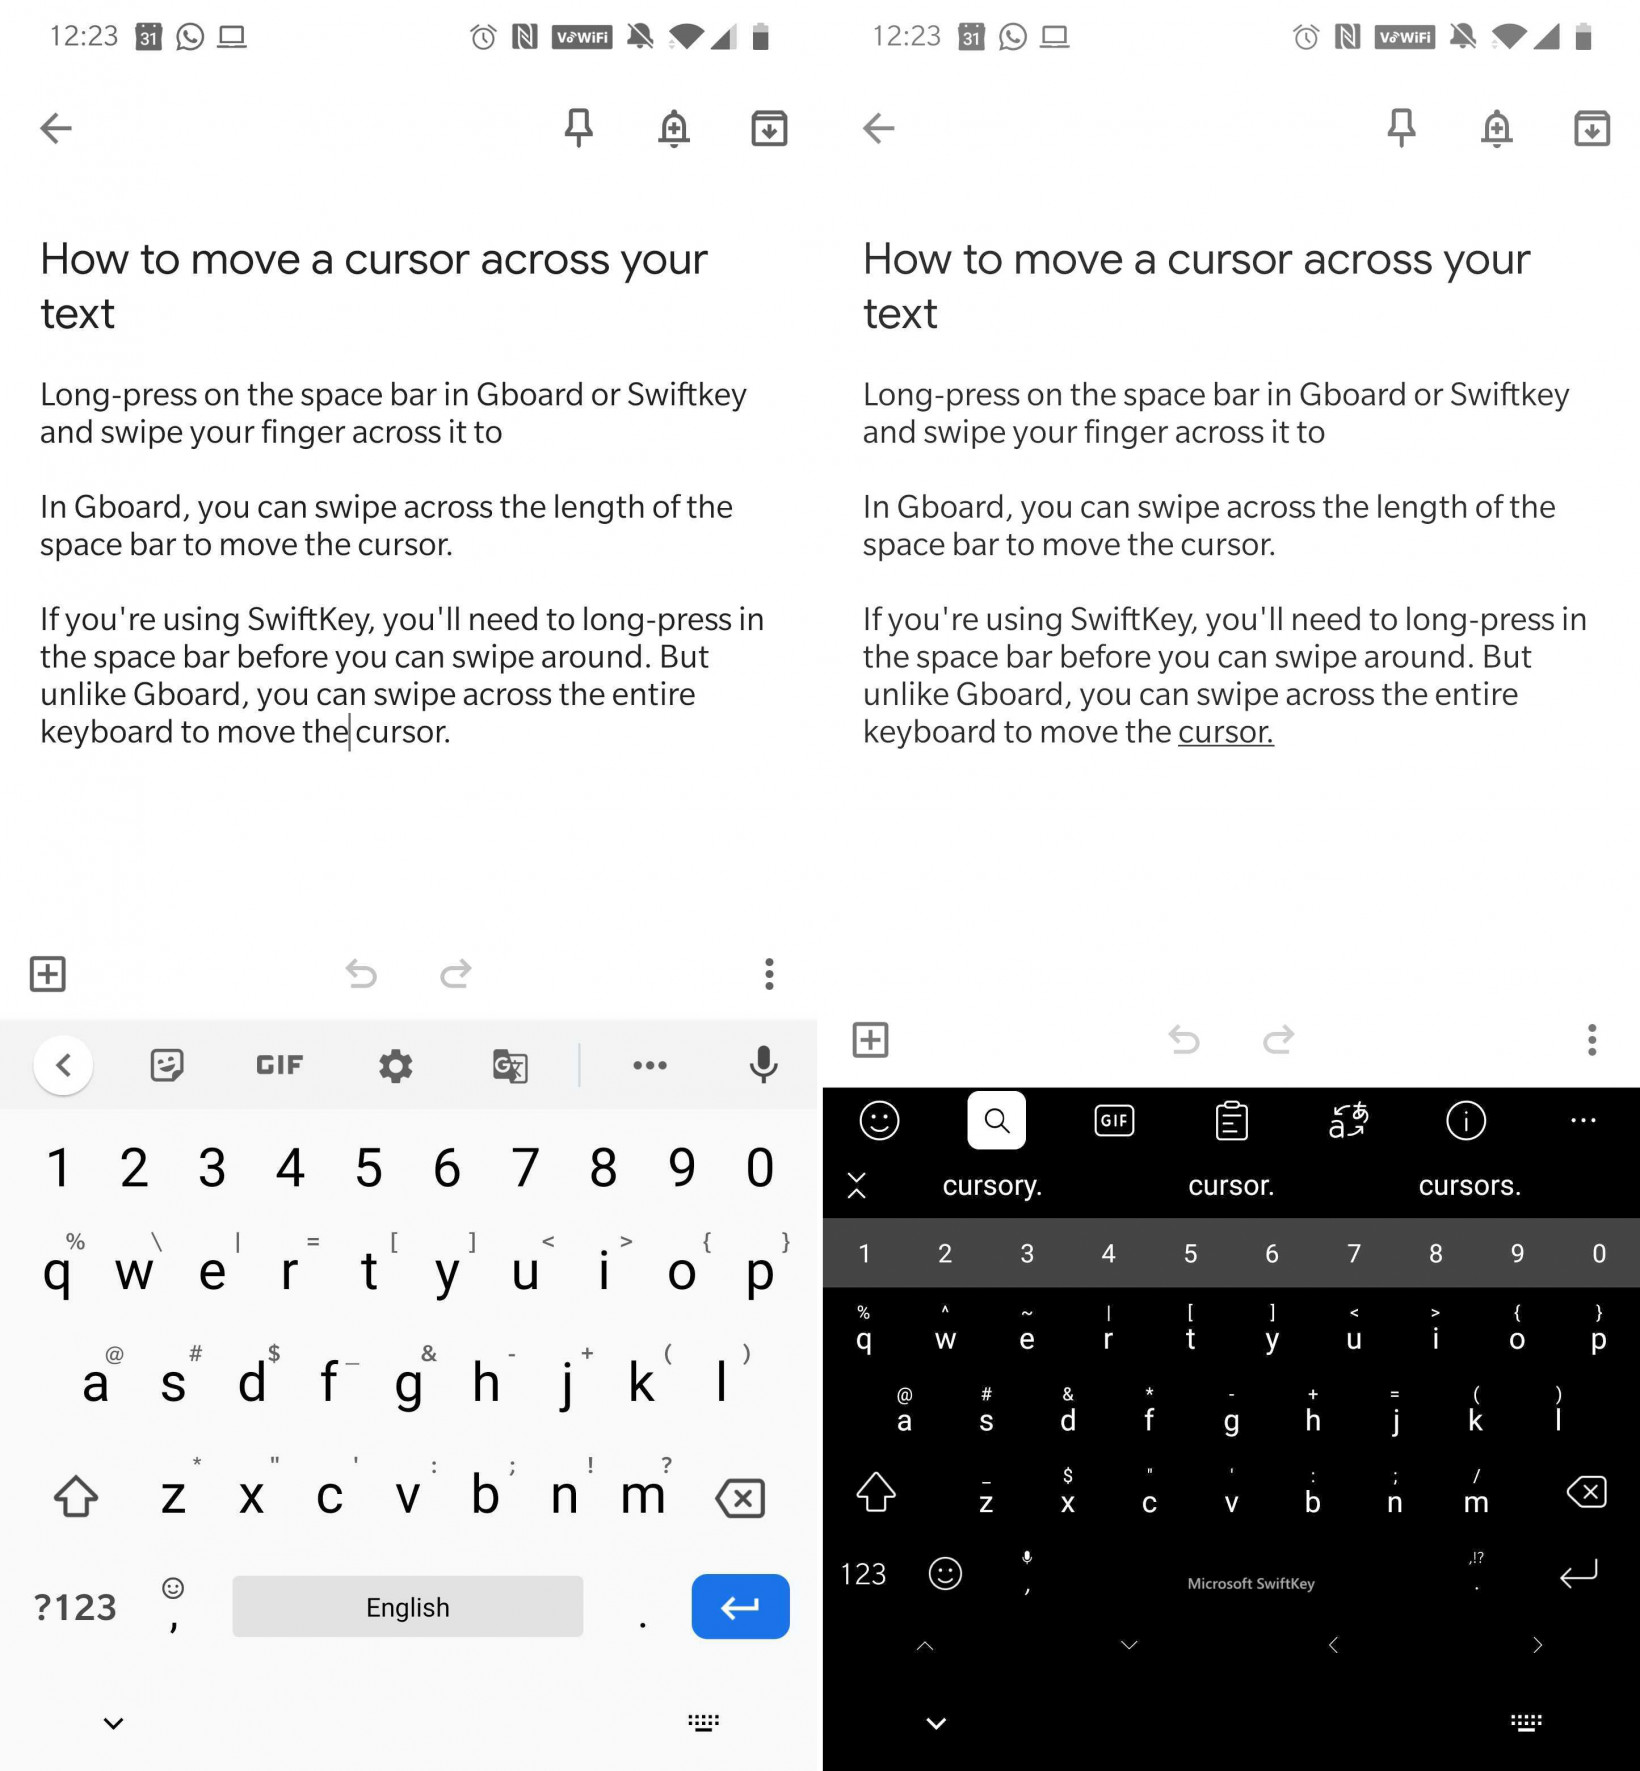 With Gboard for Android (left), you can swipe on the spacebar to move the cursor - SwiftKey lets you swipe across the entire keyboard and also add a row of arrow buttons